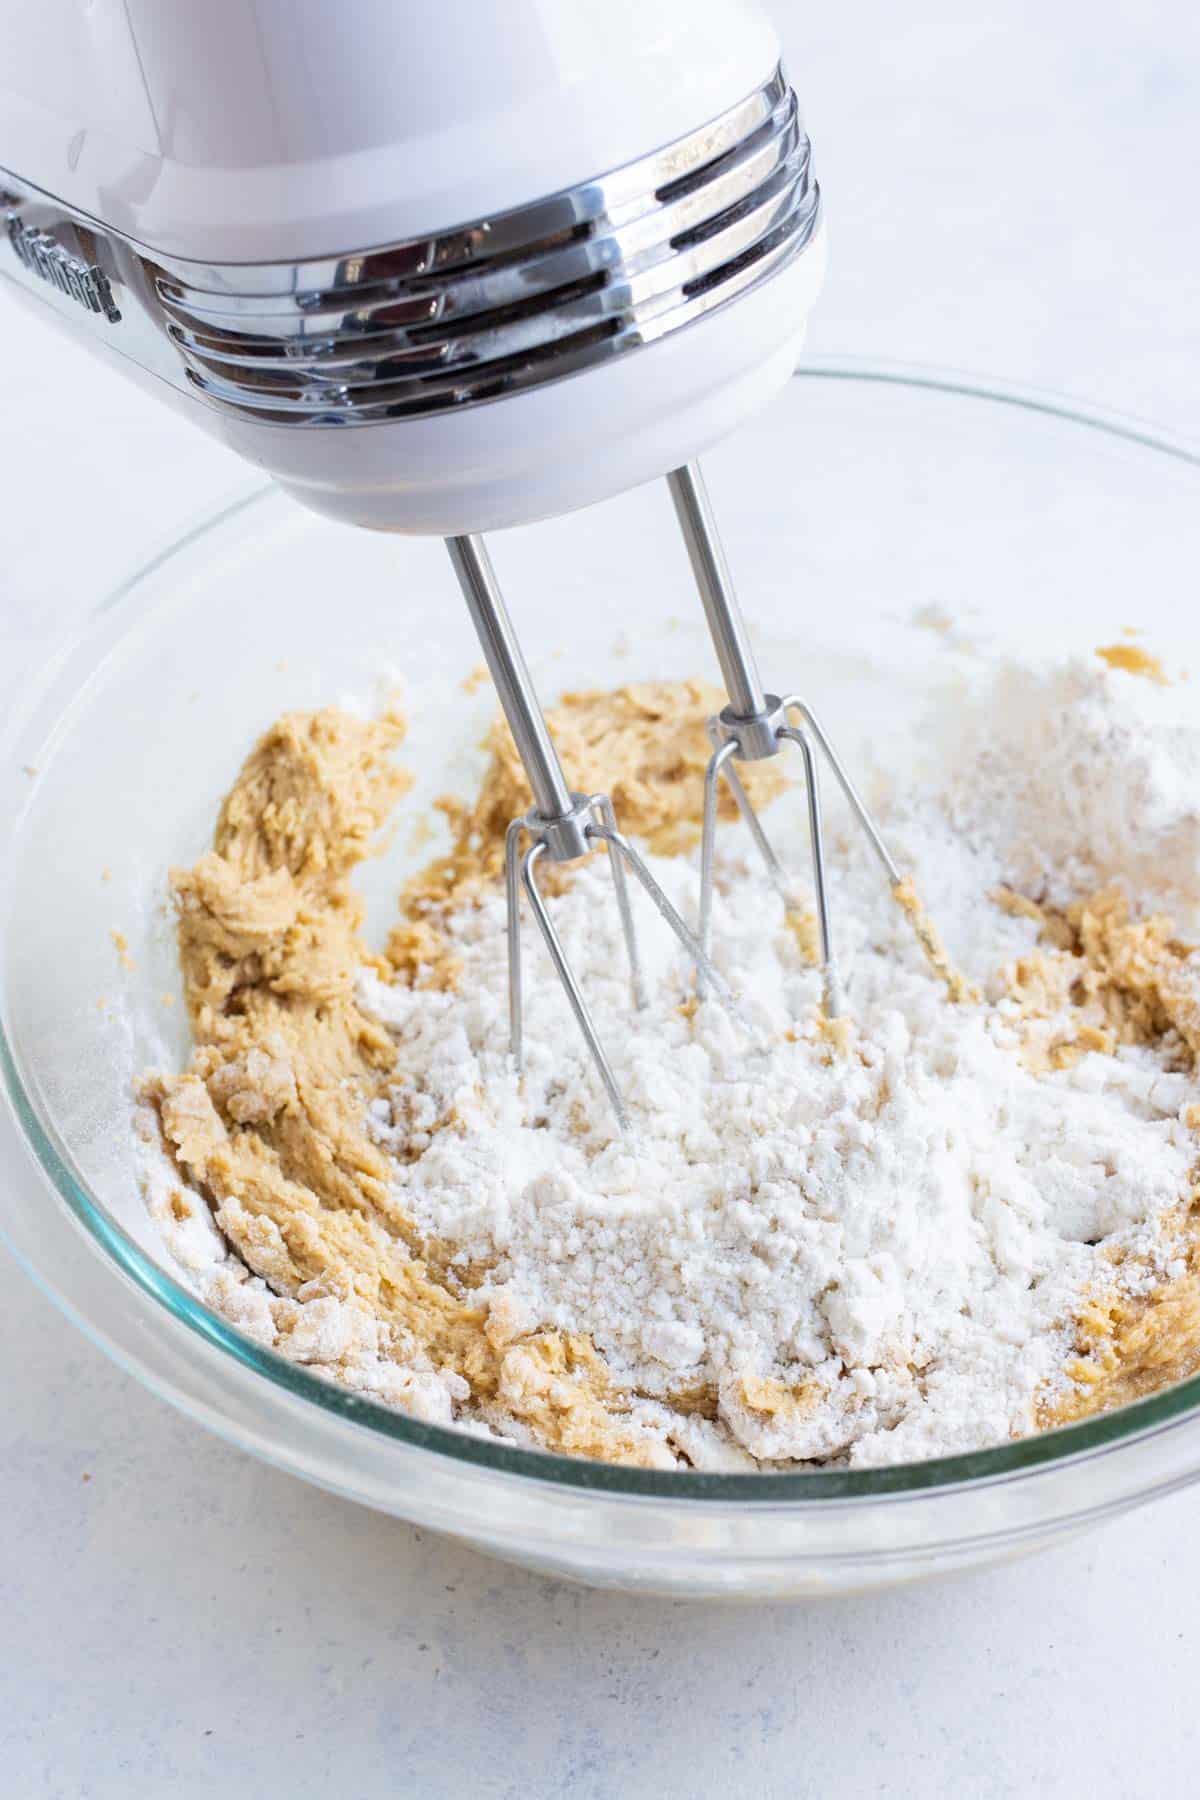 Dry ingredients are added to the sugar and peanut butter mixture.